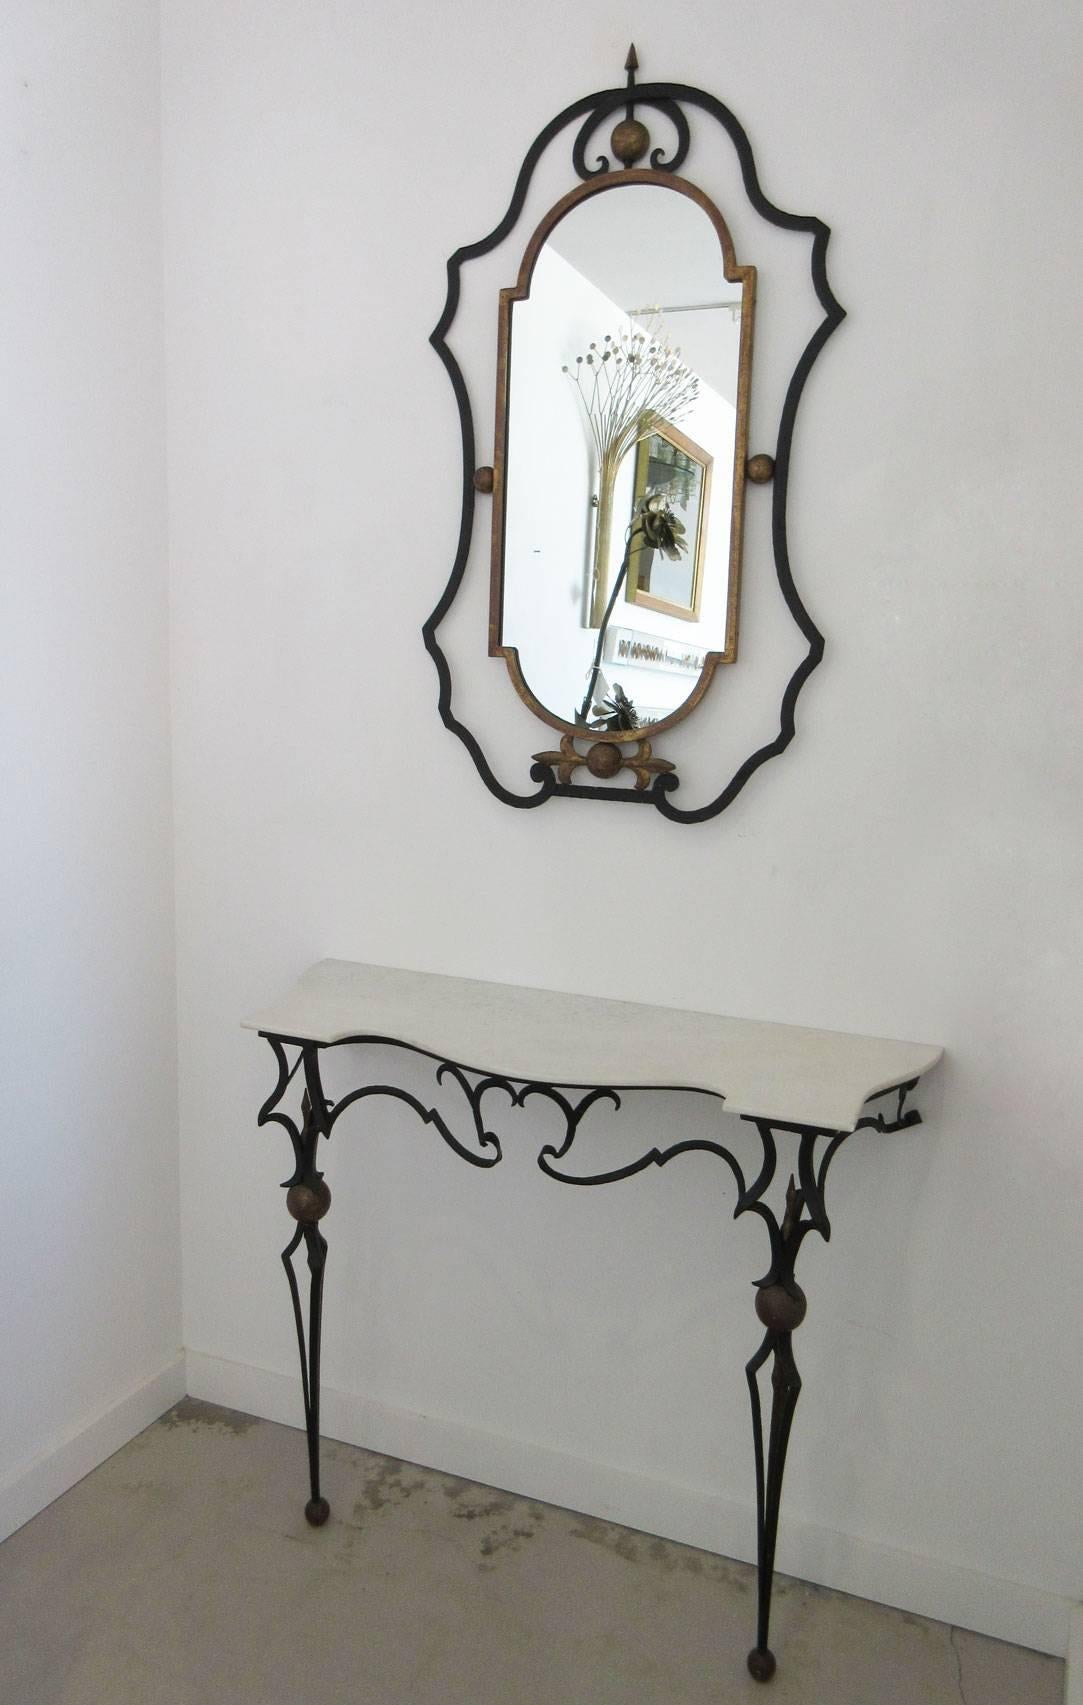 Italian marble-top console and mirror by Palladio, circa 1950s
Measures: 32.5" height, 38.5" wide, 12.5" deep
Mirror 40.5 height, 24" wide.